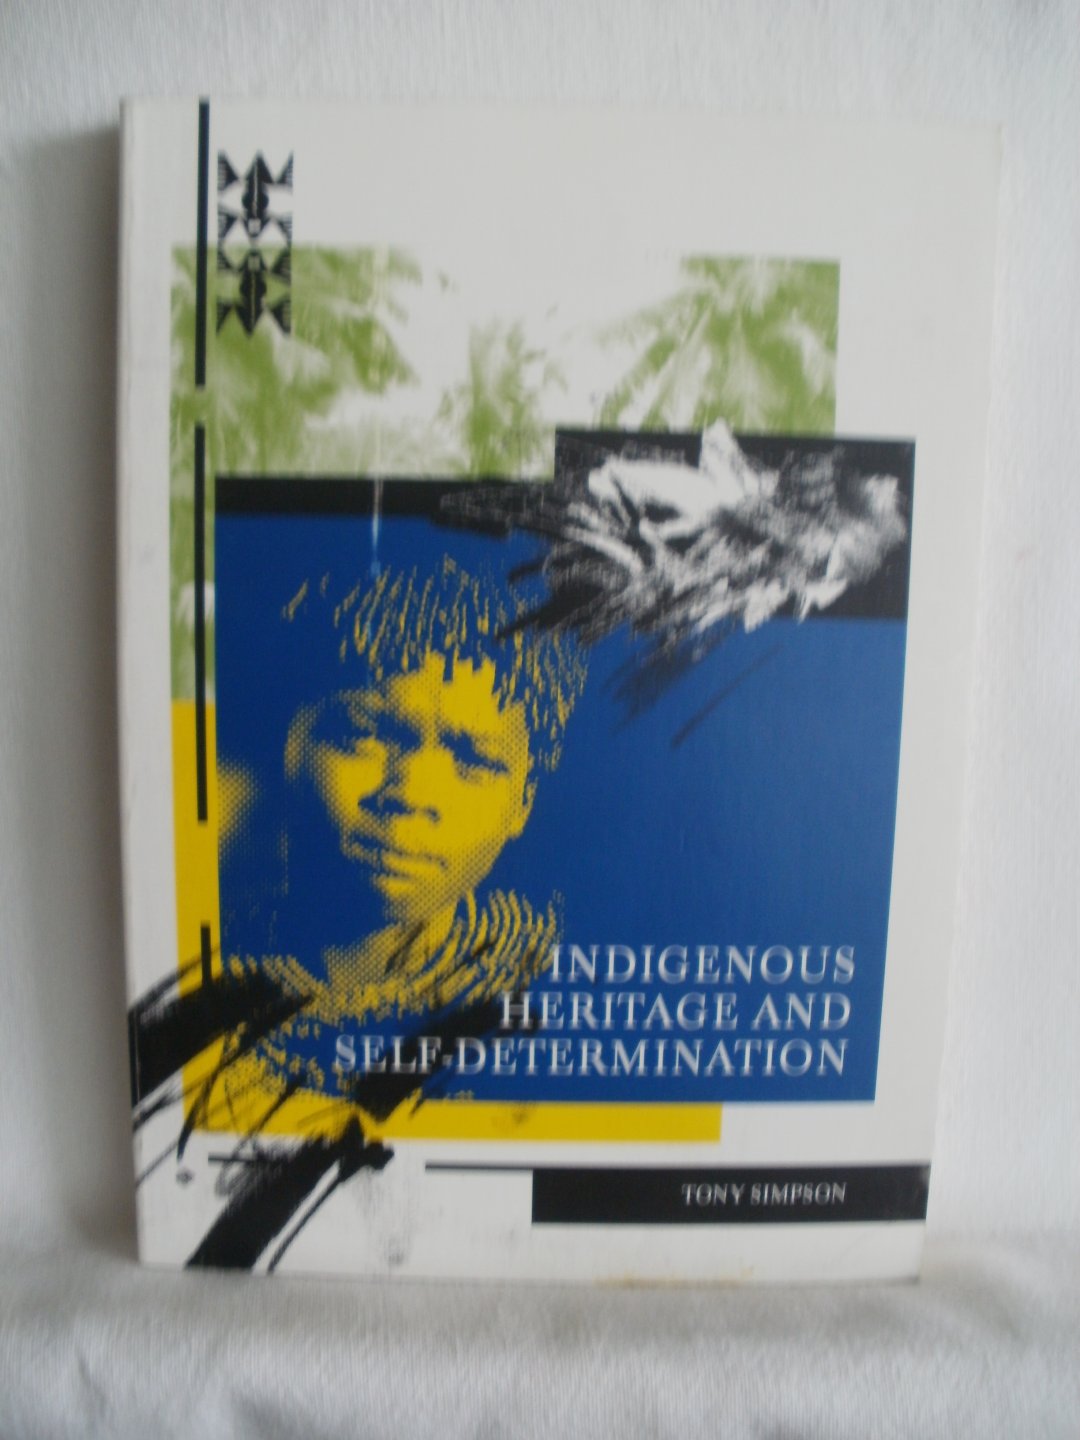 Simpson, Tony - Indigenous Heritage and Self-Determination. The Cultural and Intellectual Property Rights of Indigenous Peoples. Document IWGIA no. 86.